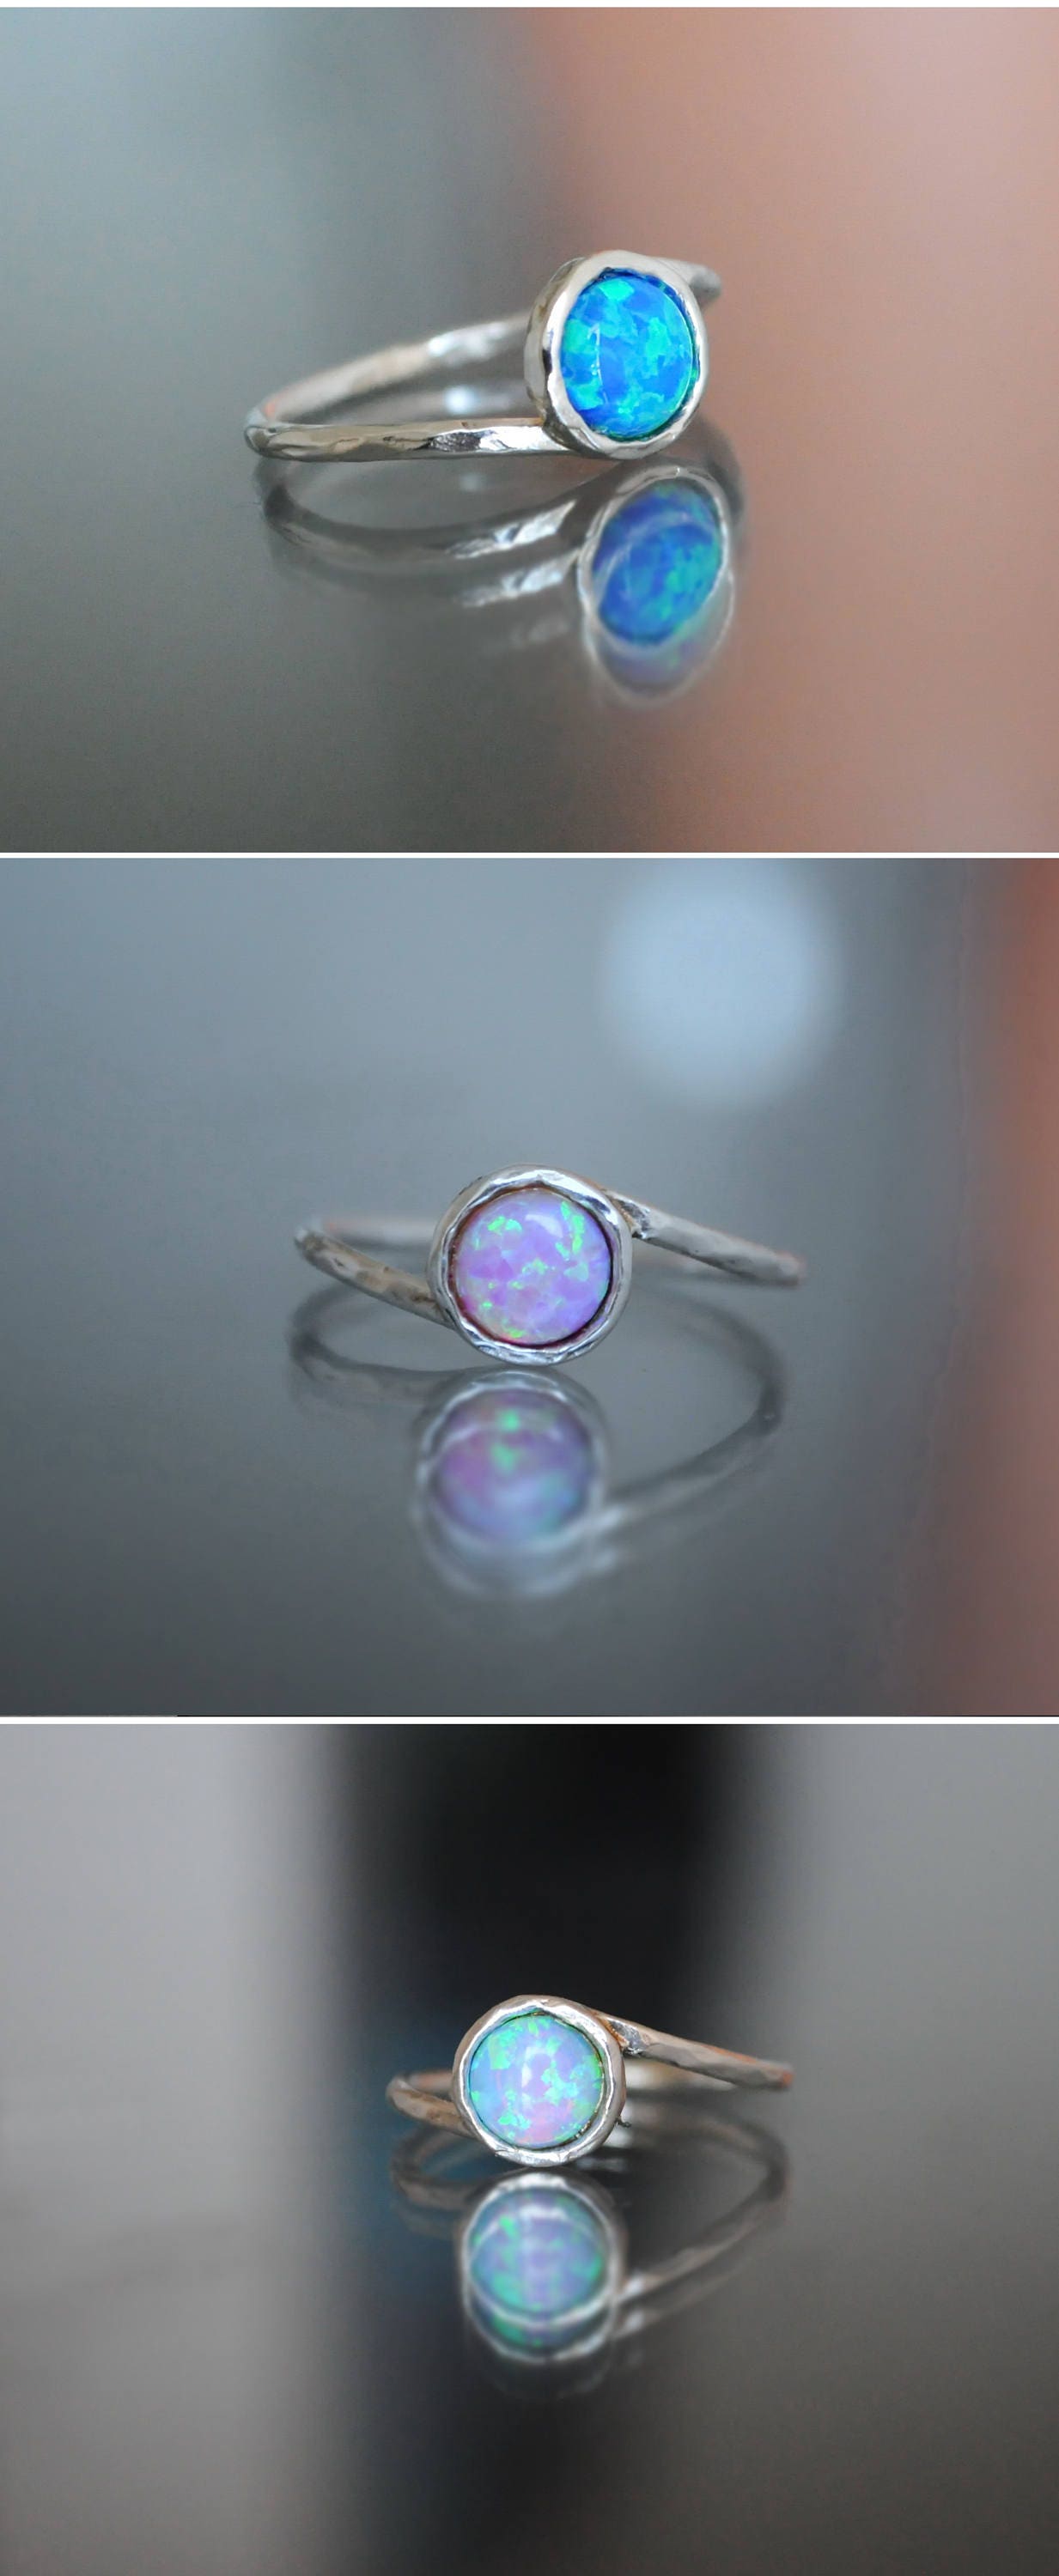 Fire Opal Rings. Opal Ring. Mothers Day Gift. Dainty Stack | Etsy